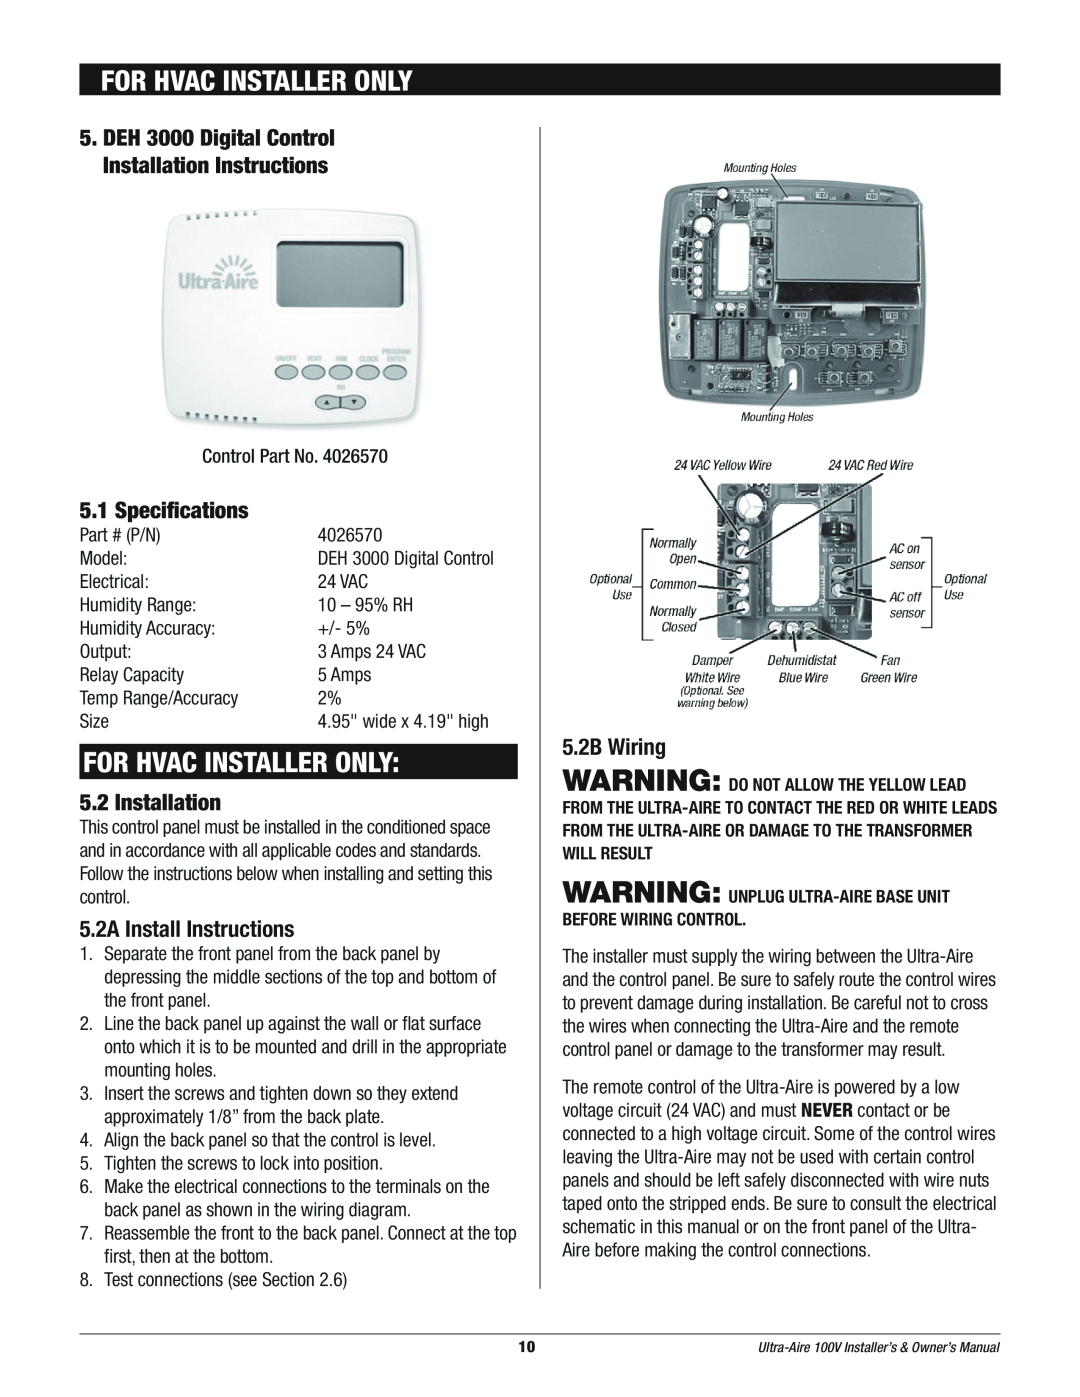 Therma-Stor Products Group Ultra-Aire 100V Specifications, Installation, 5.2A Install Instructions, 5.2B Wiring 